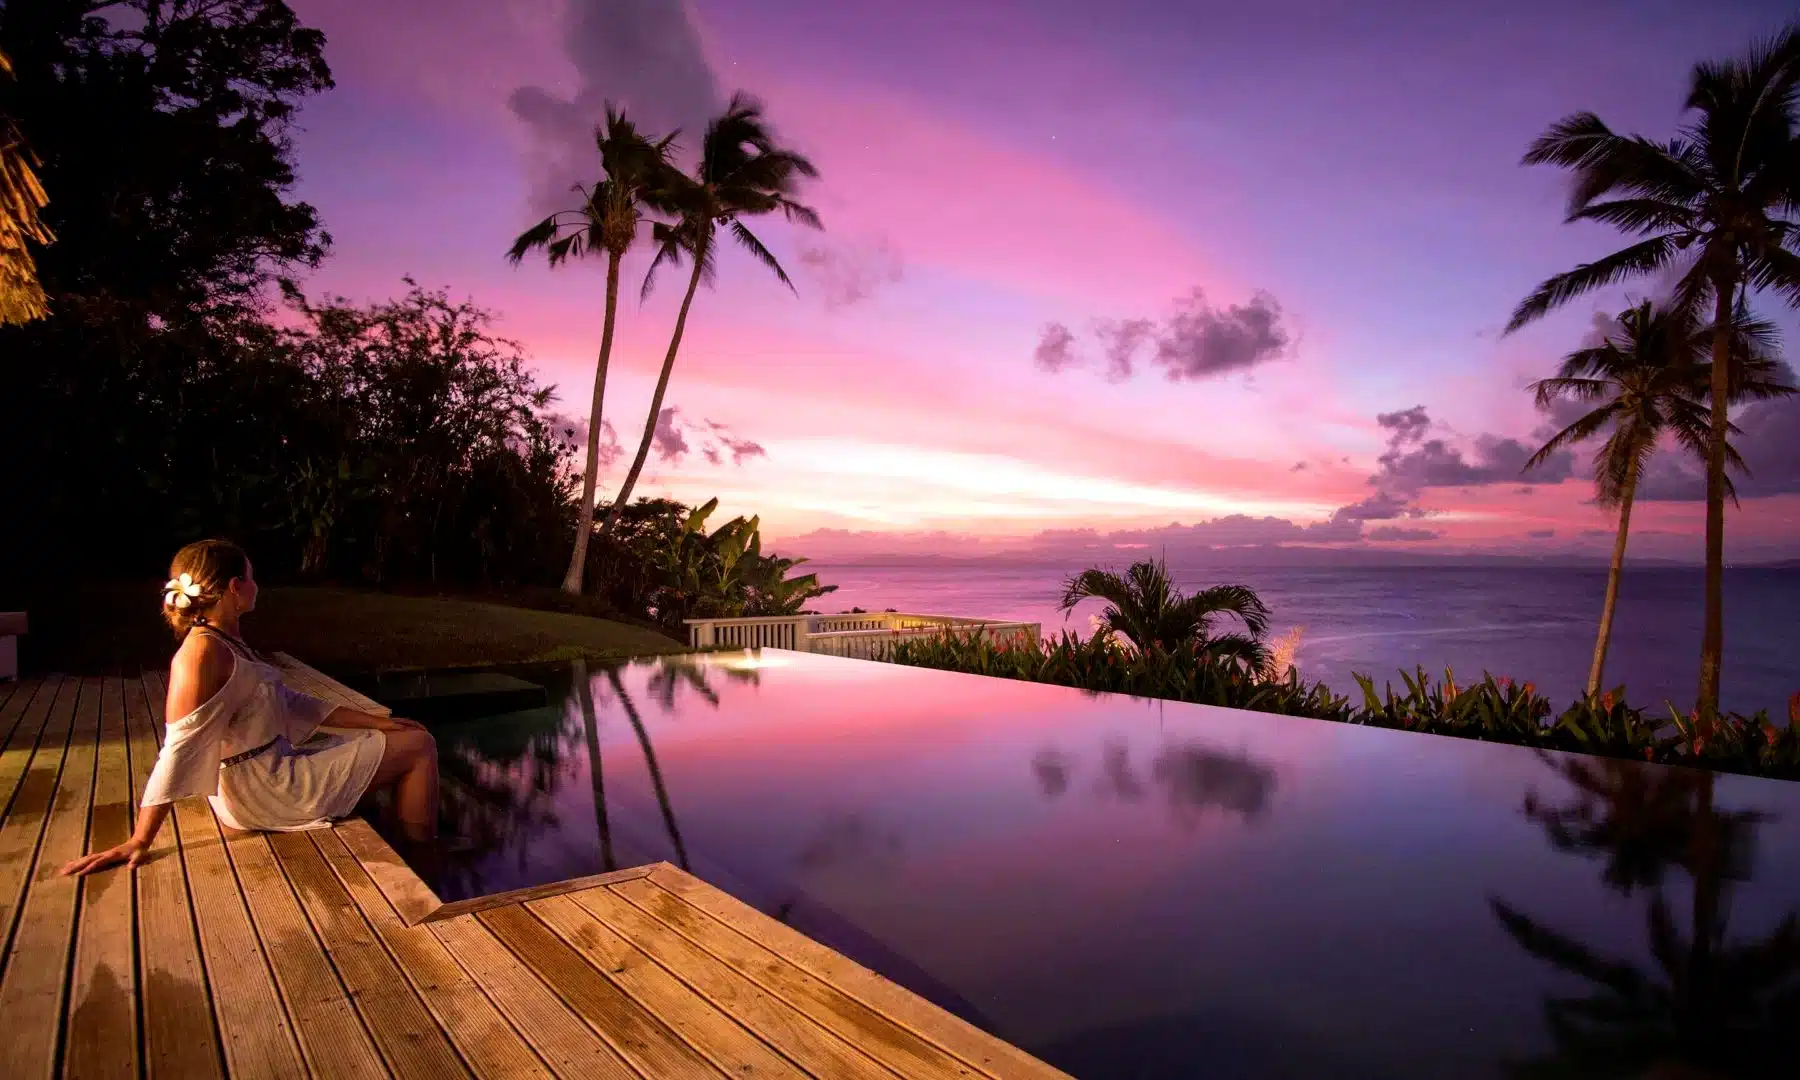 Private resort Fiji, fundraiser auction items, live auction items